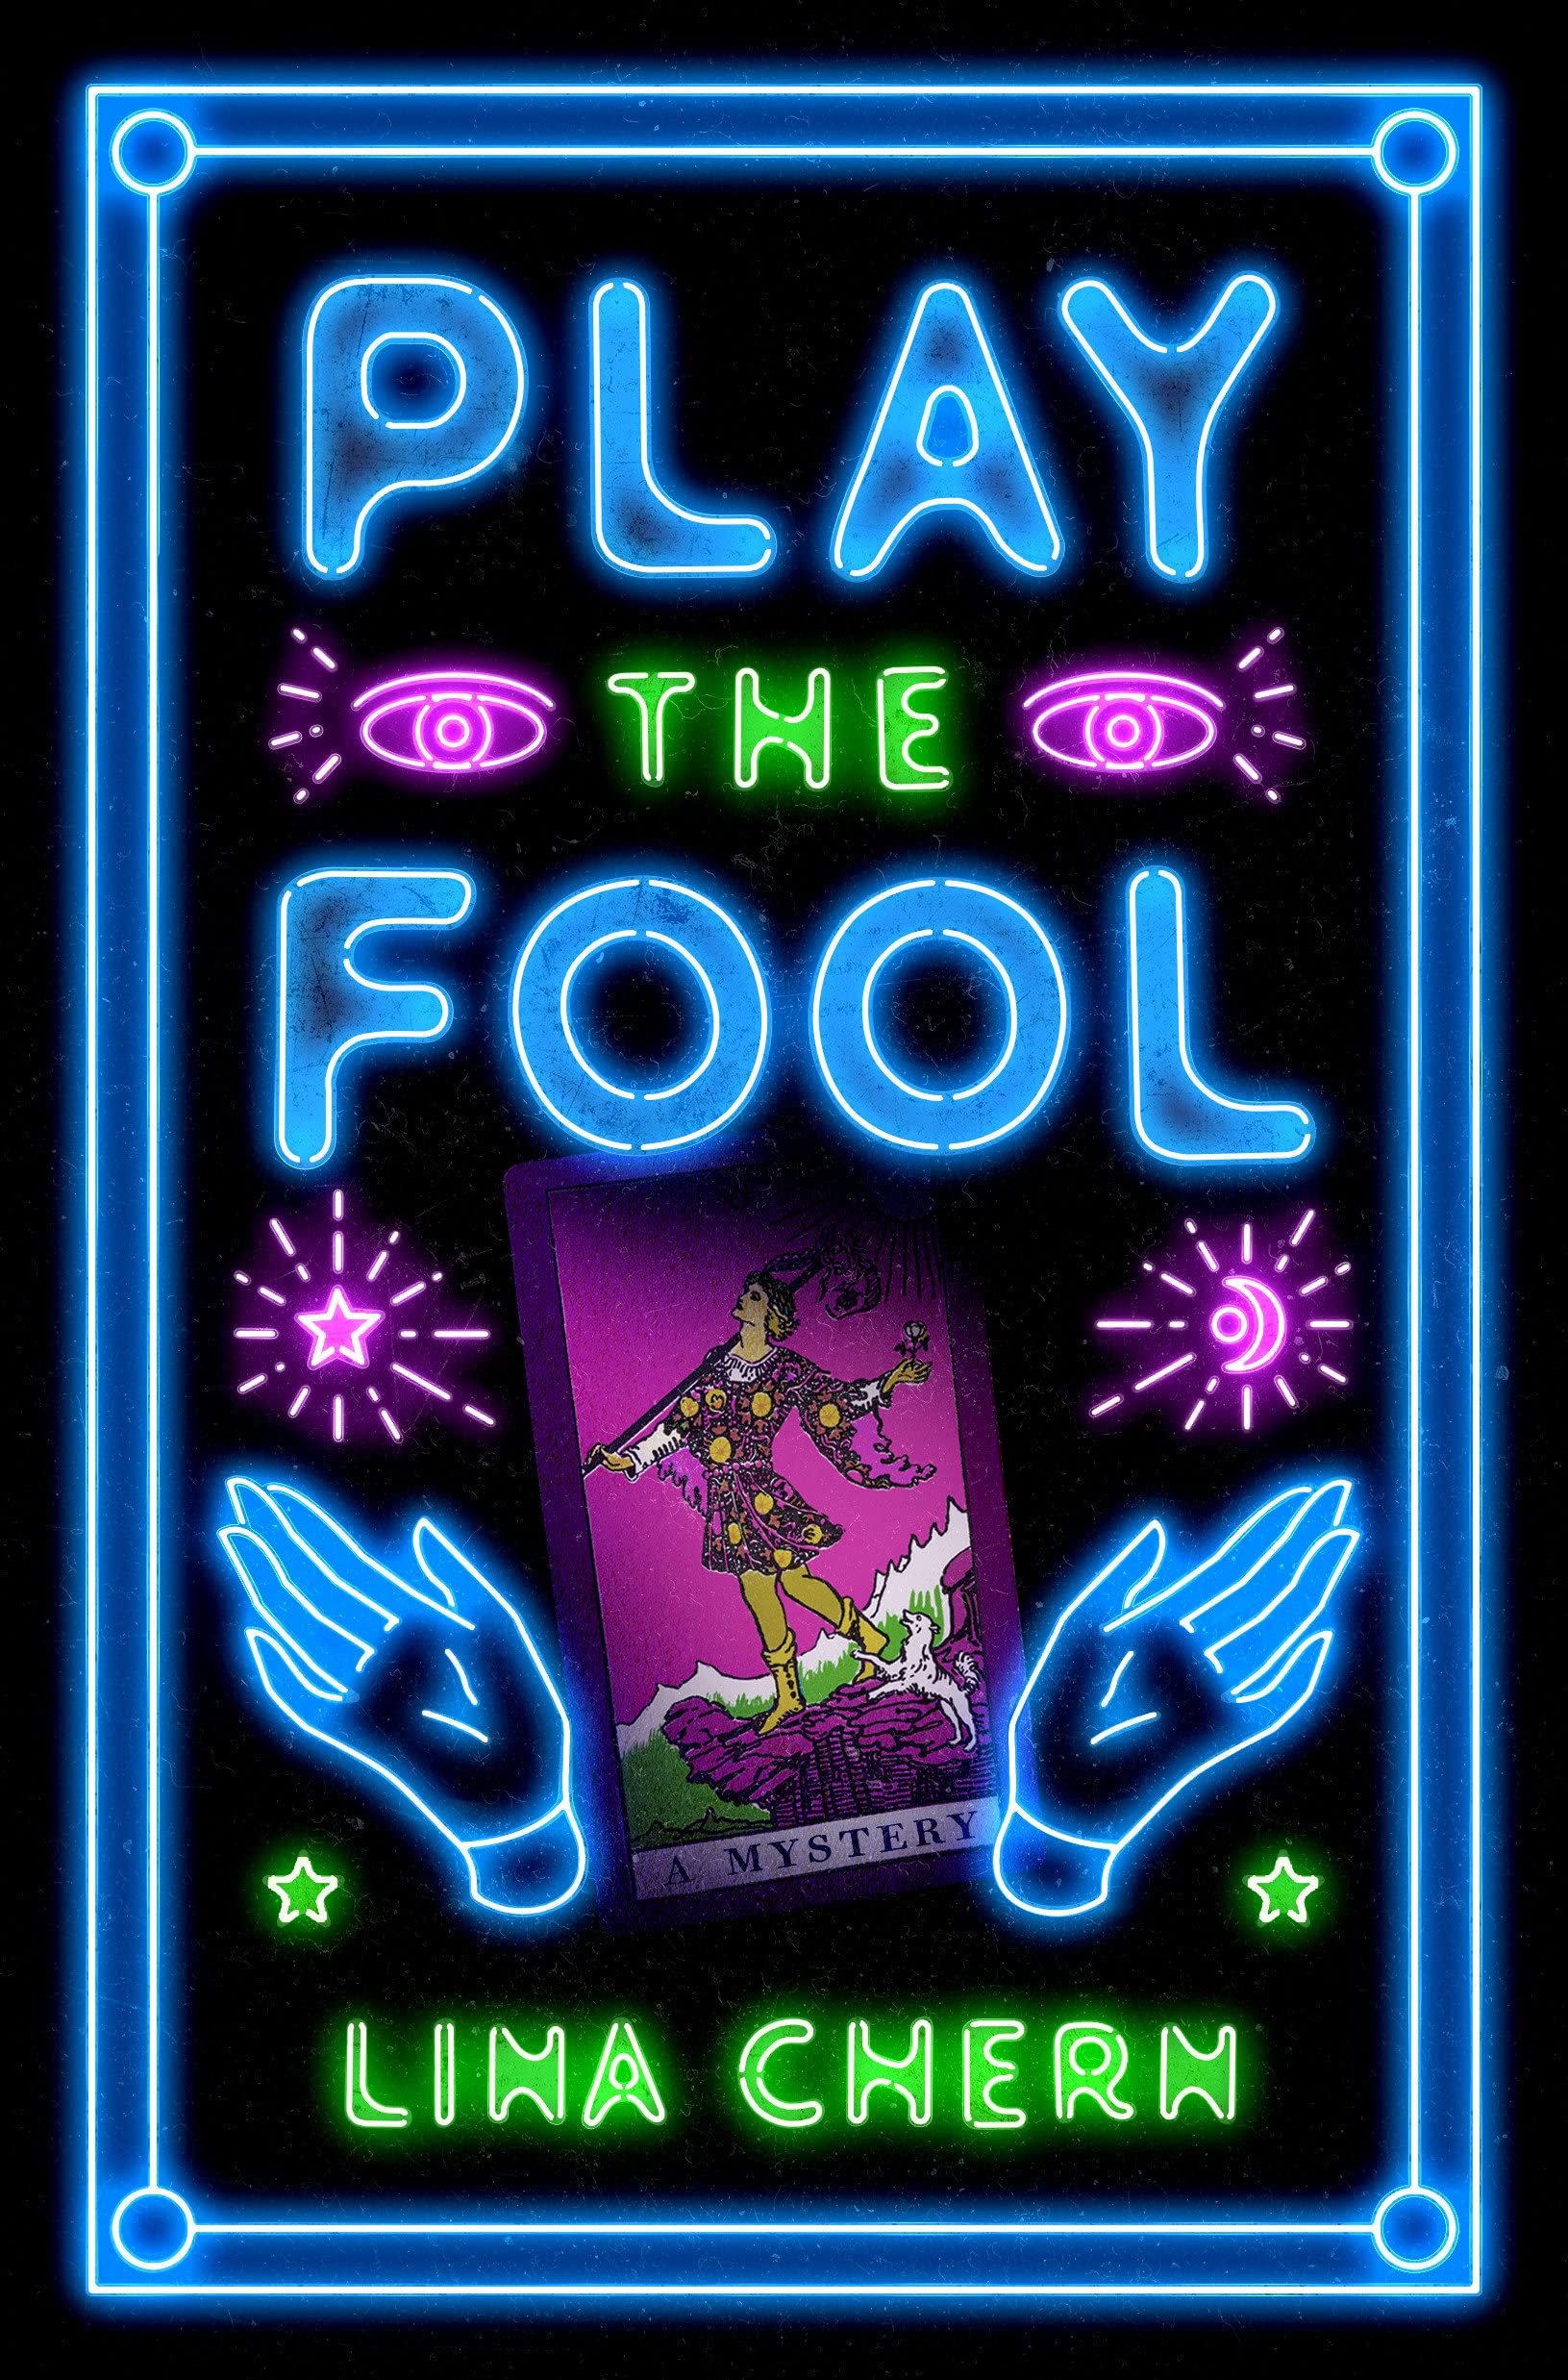 Image for "Play the Fool"